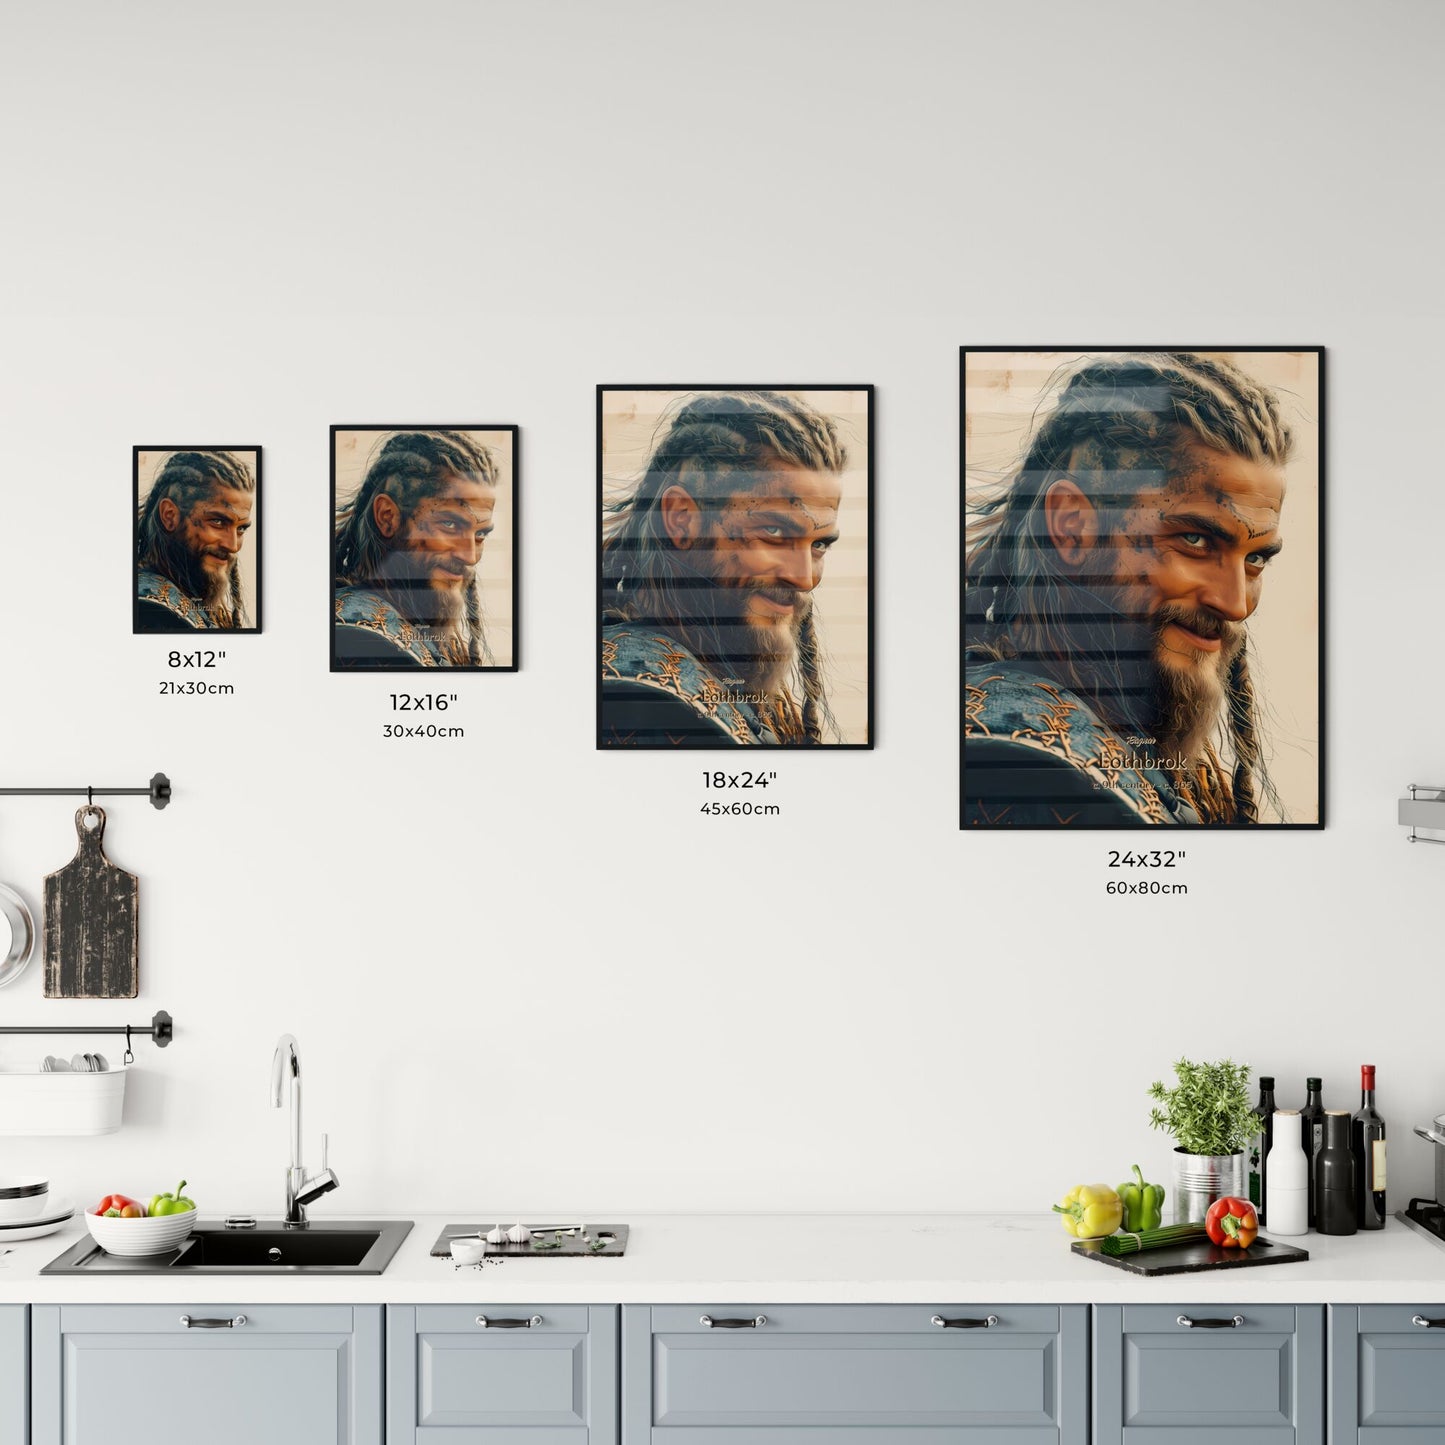 Ragnar, Lothbrok, c. 9th century - c. 865, A Poster of a man with braided hair and beard Default Title